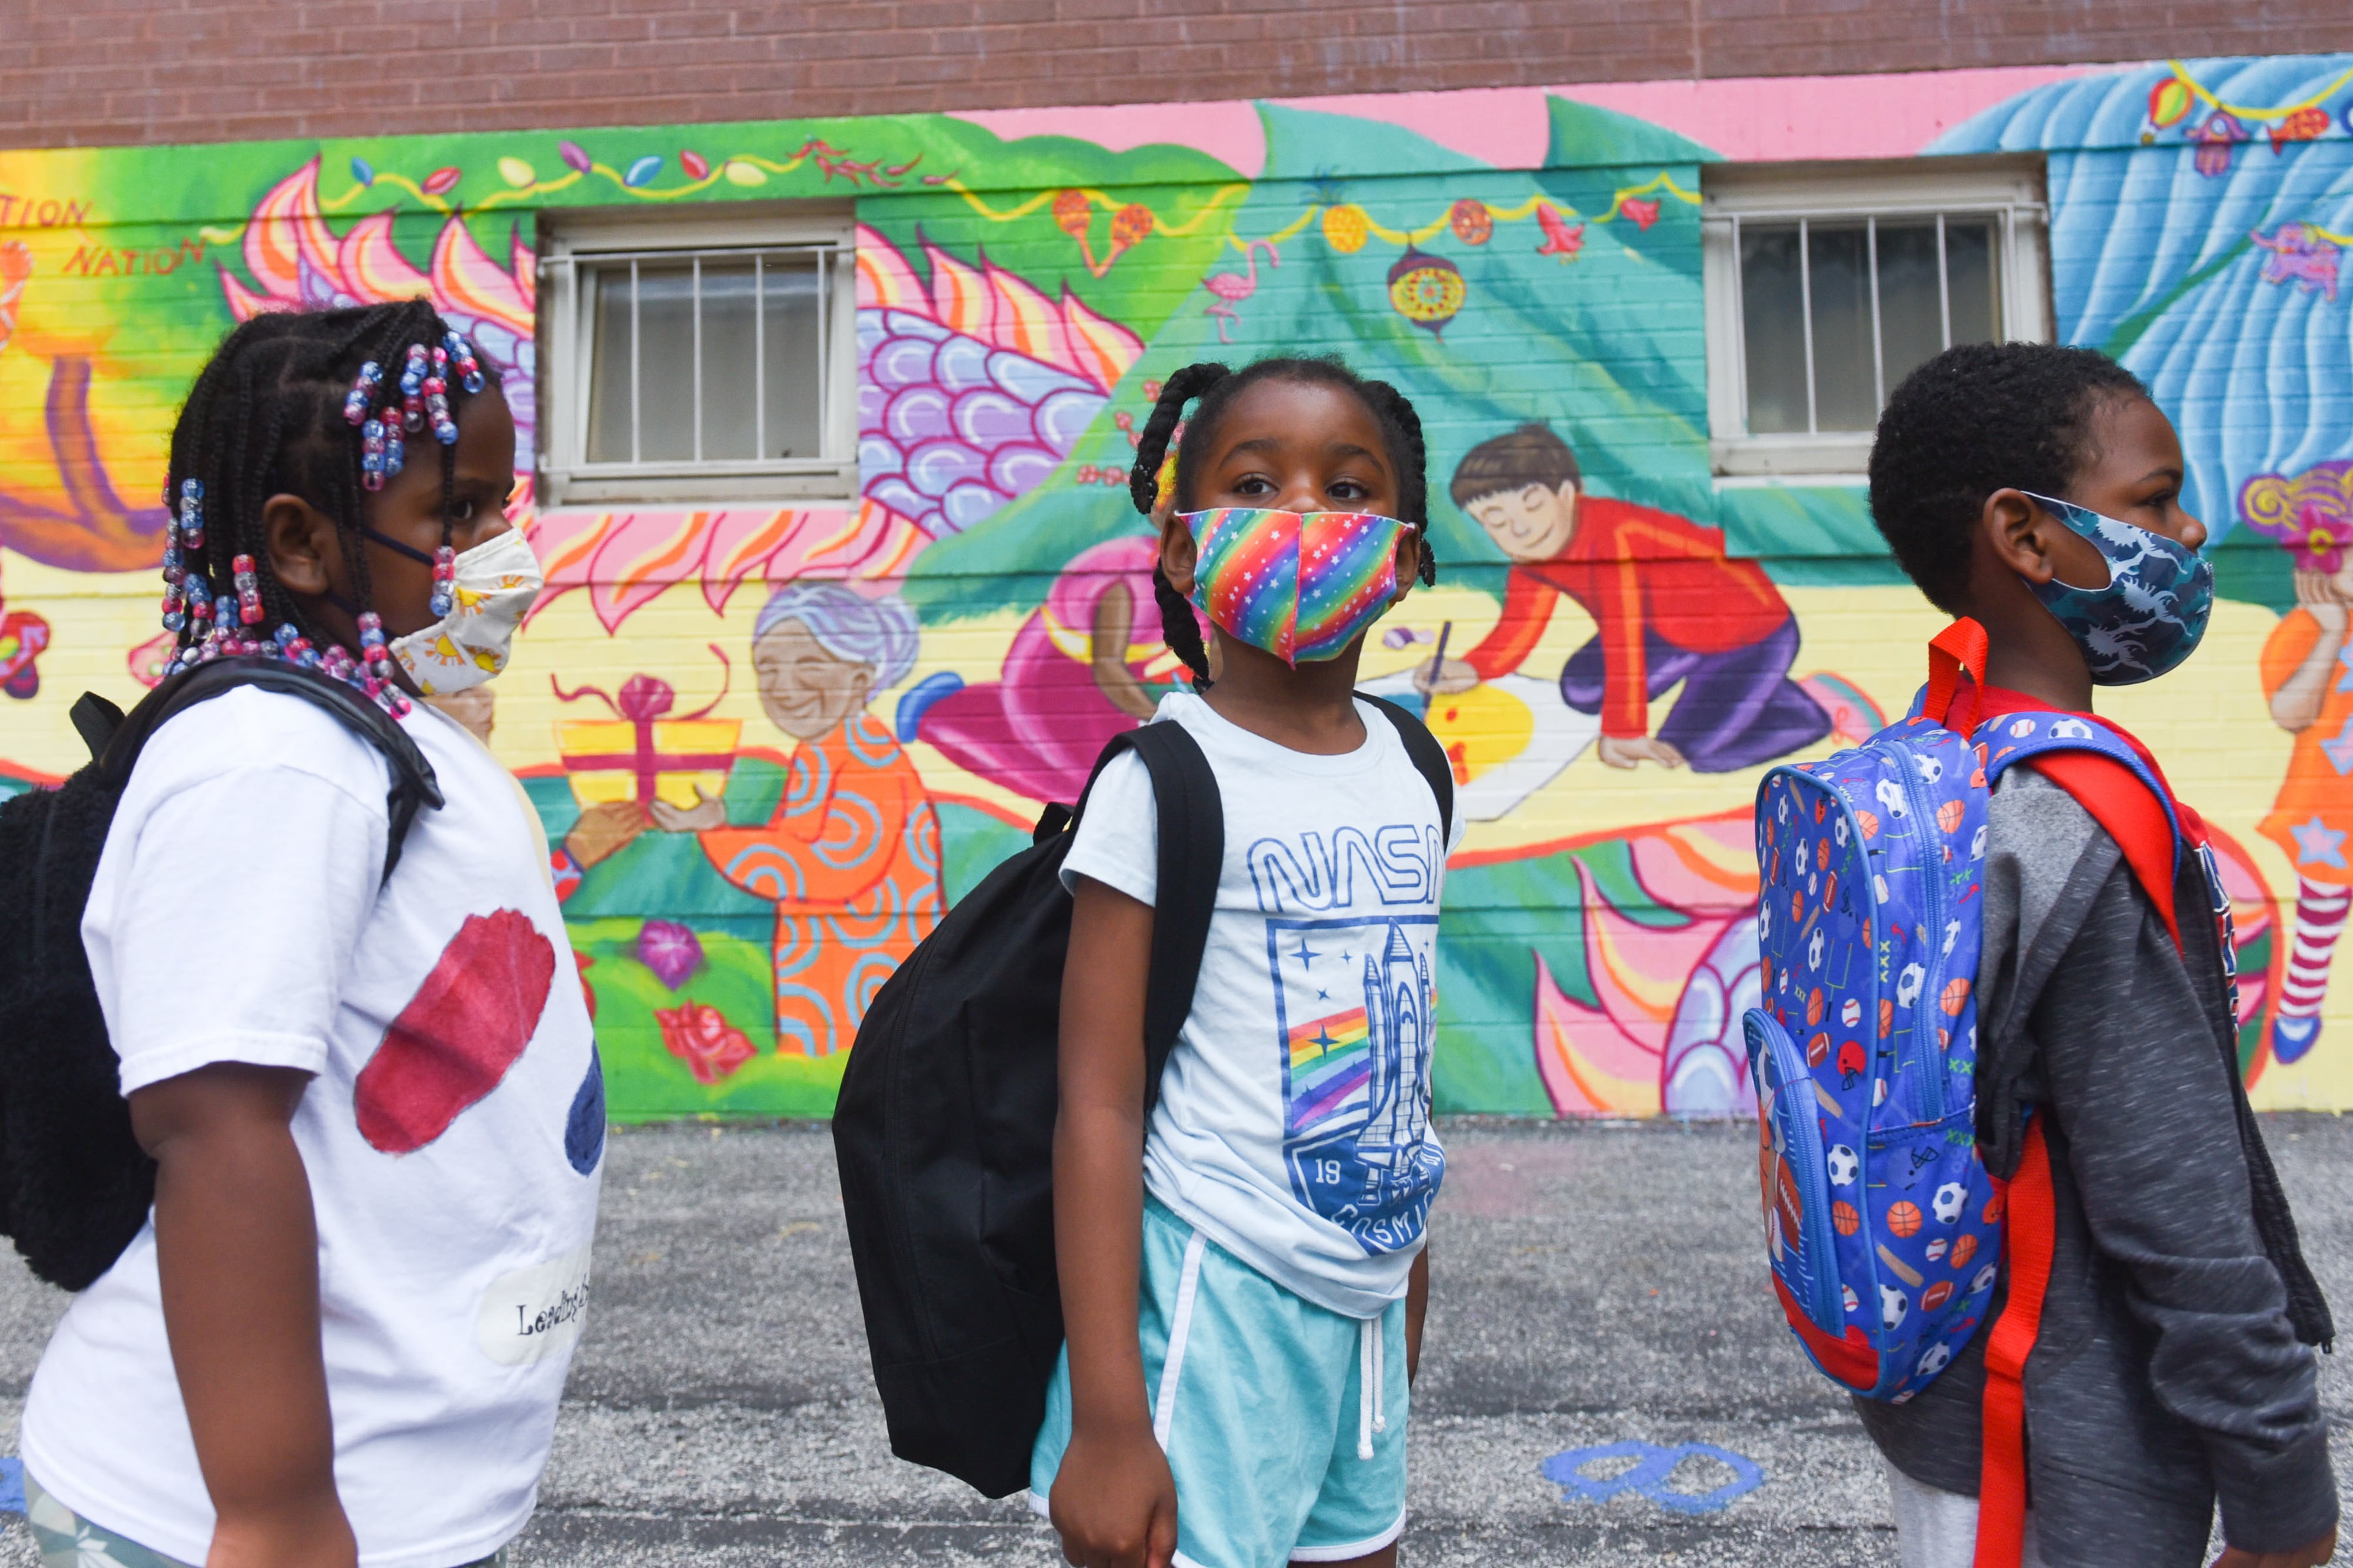 Three masked children stand in front of a brightly colored mural outside.